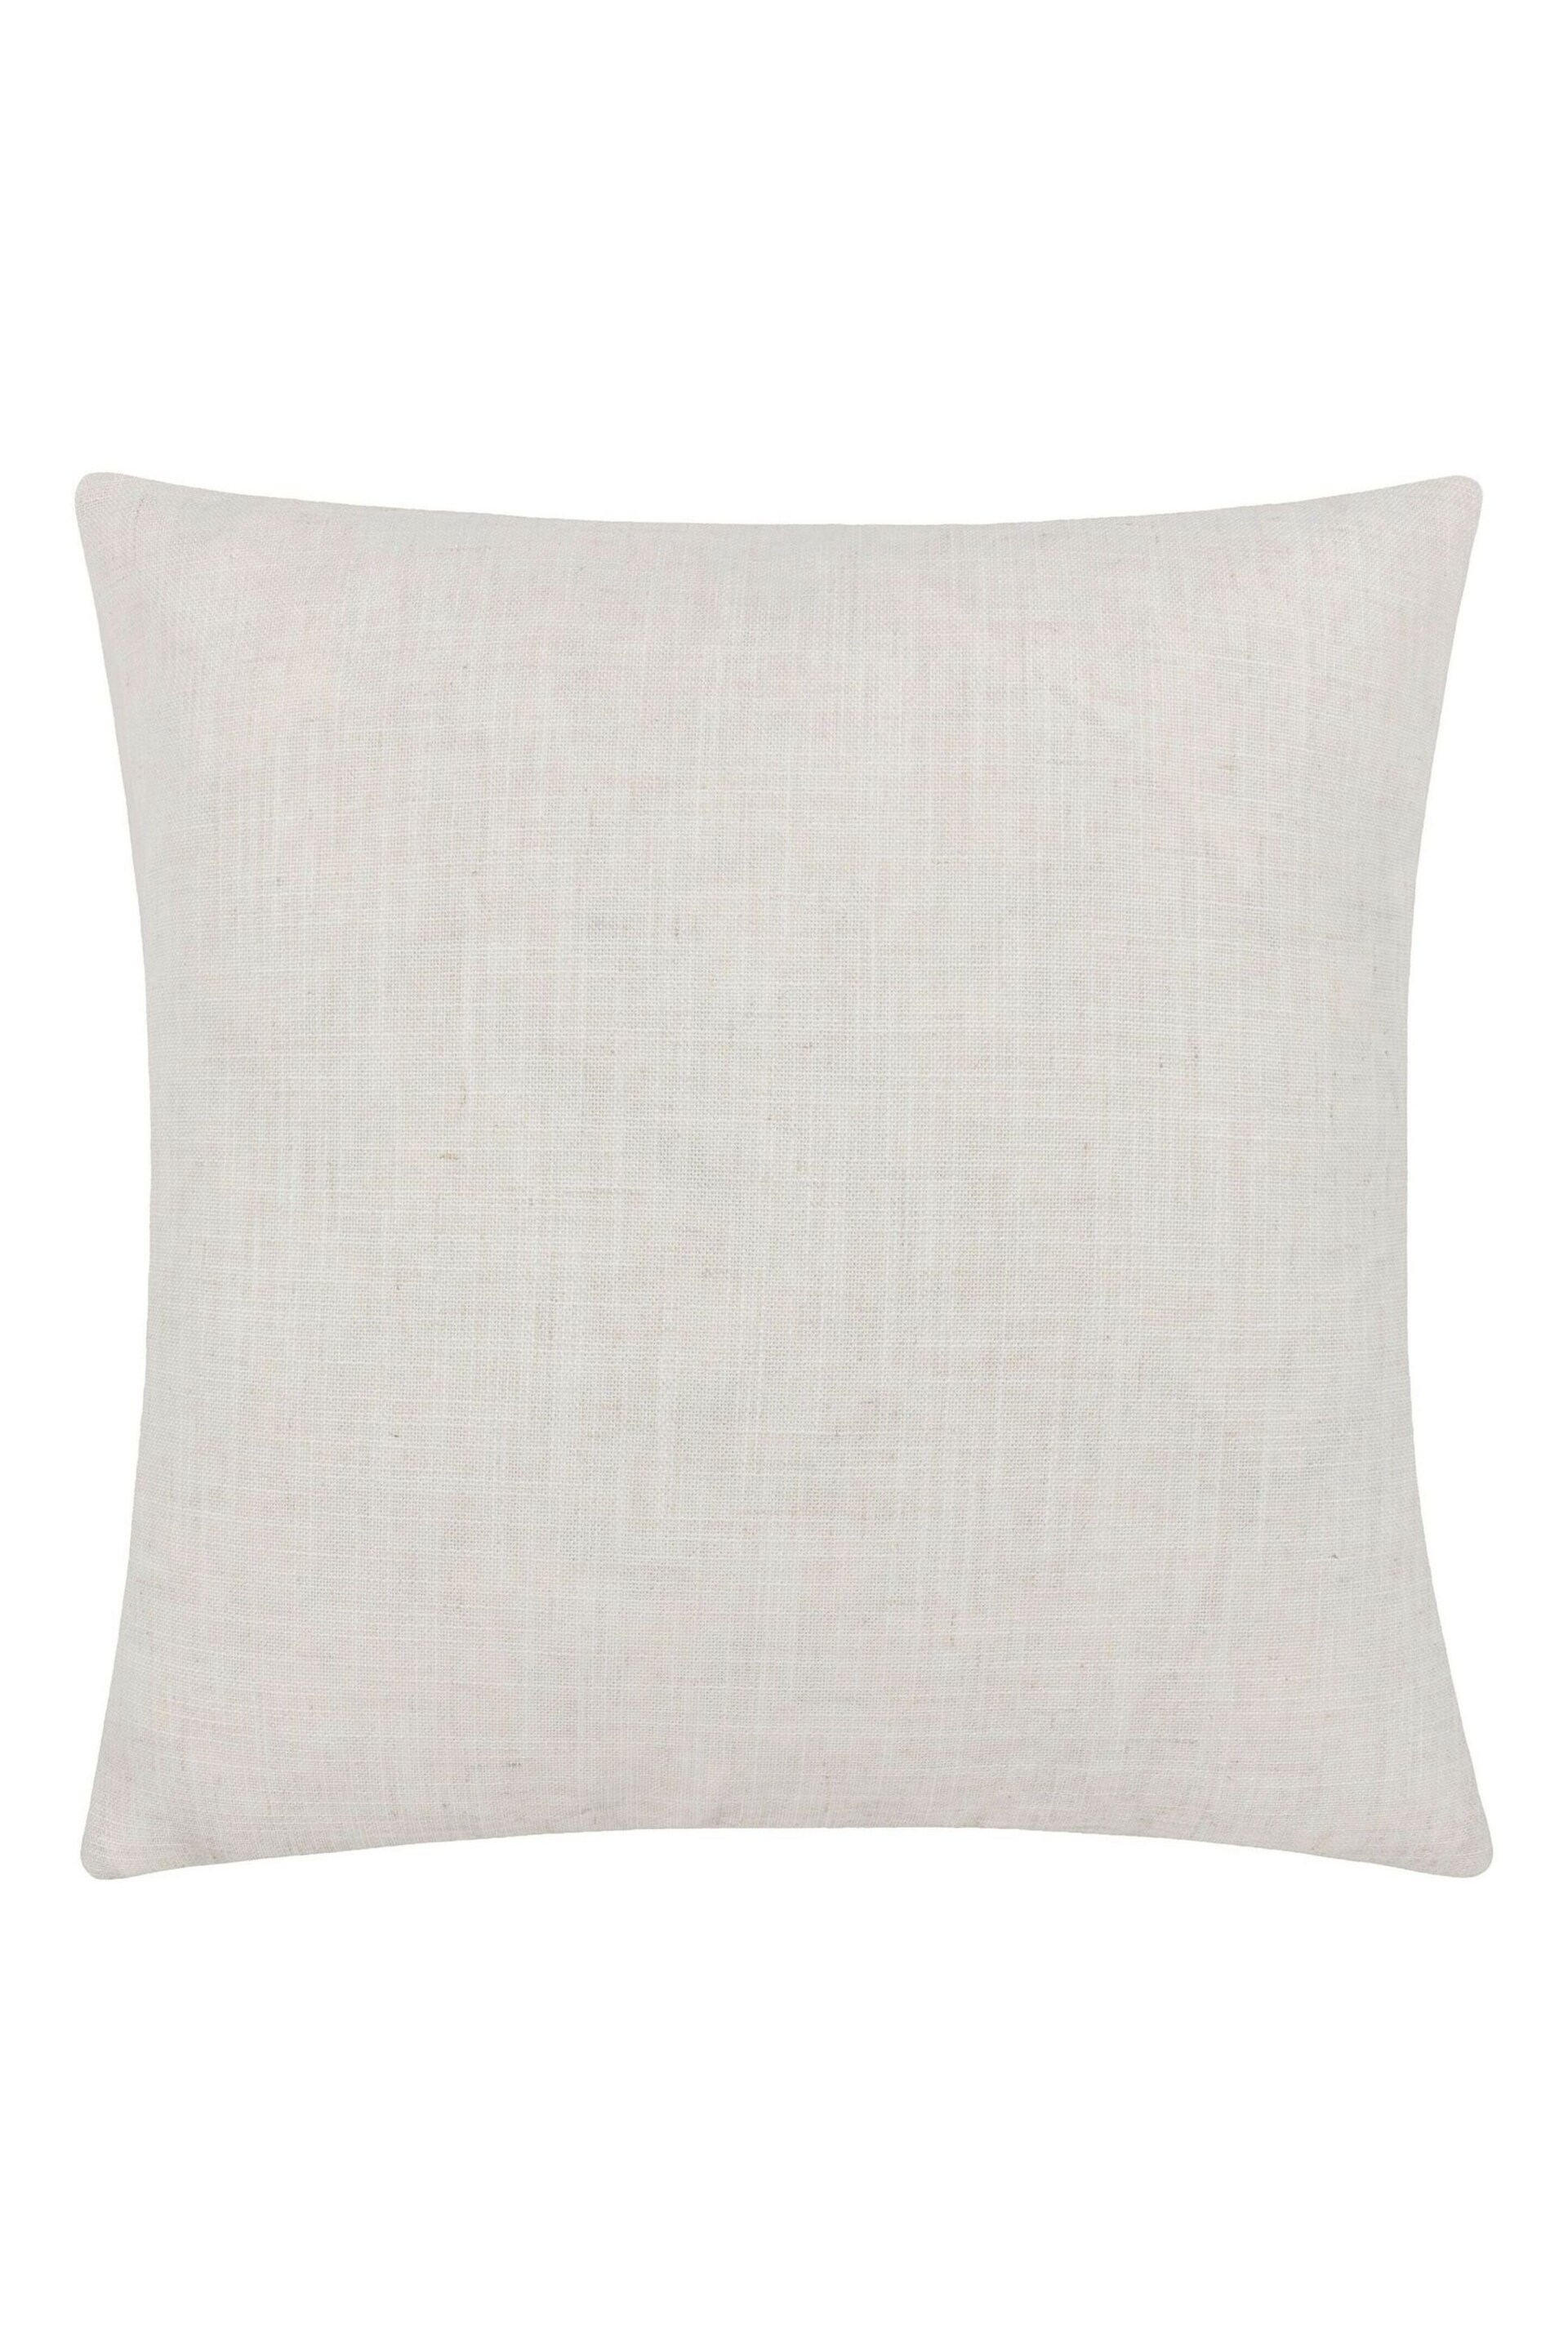 Furn Natural Tocorico Tropical Polyester Filled Cushion - Image 3 of 5